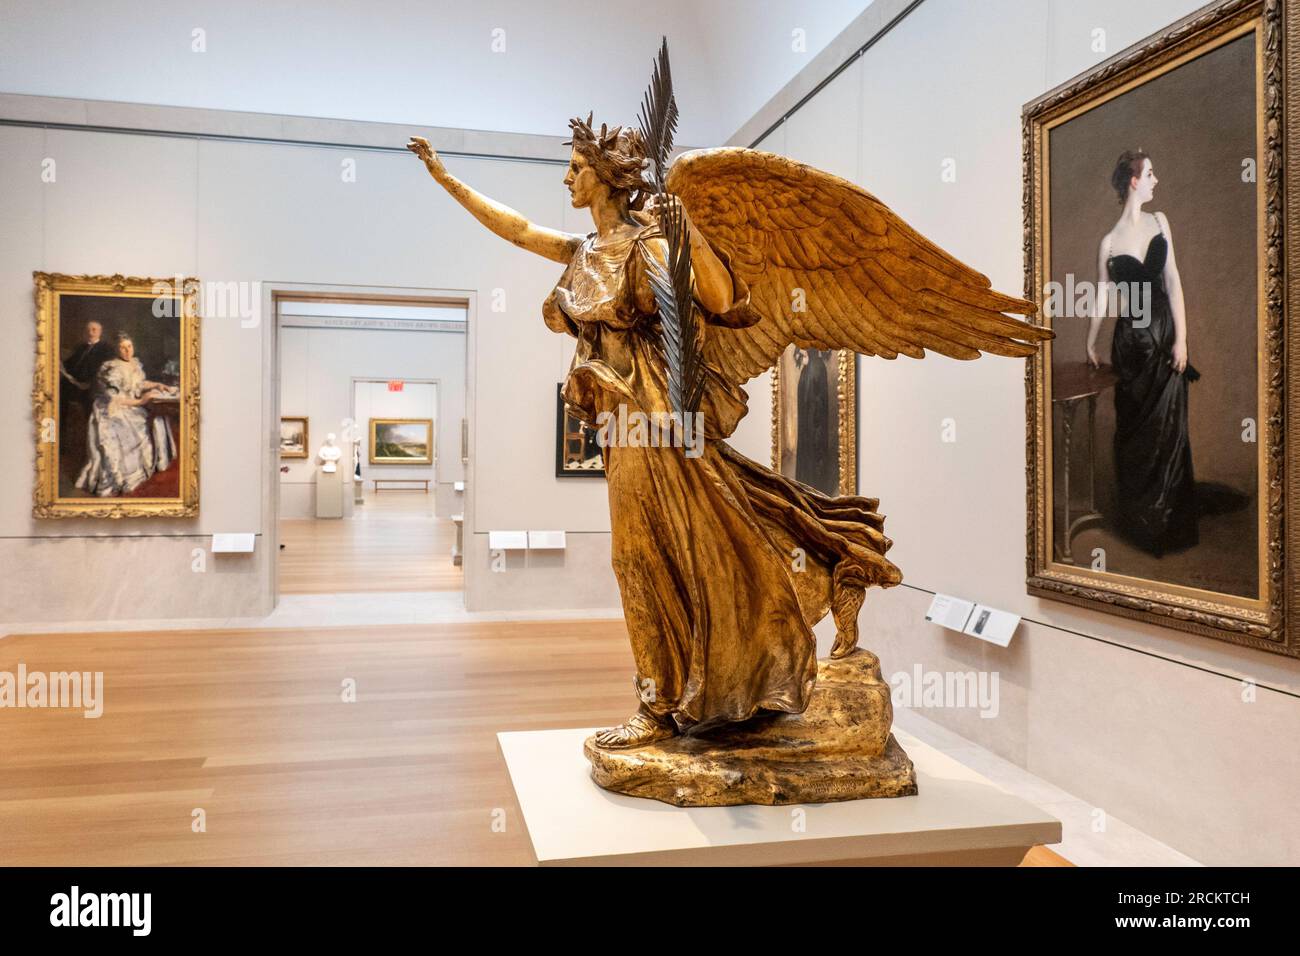 The Metropolitan Museum of Art is a popular tourist attraction on Museum Mile, New York City, USA  2023 Stock Photo